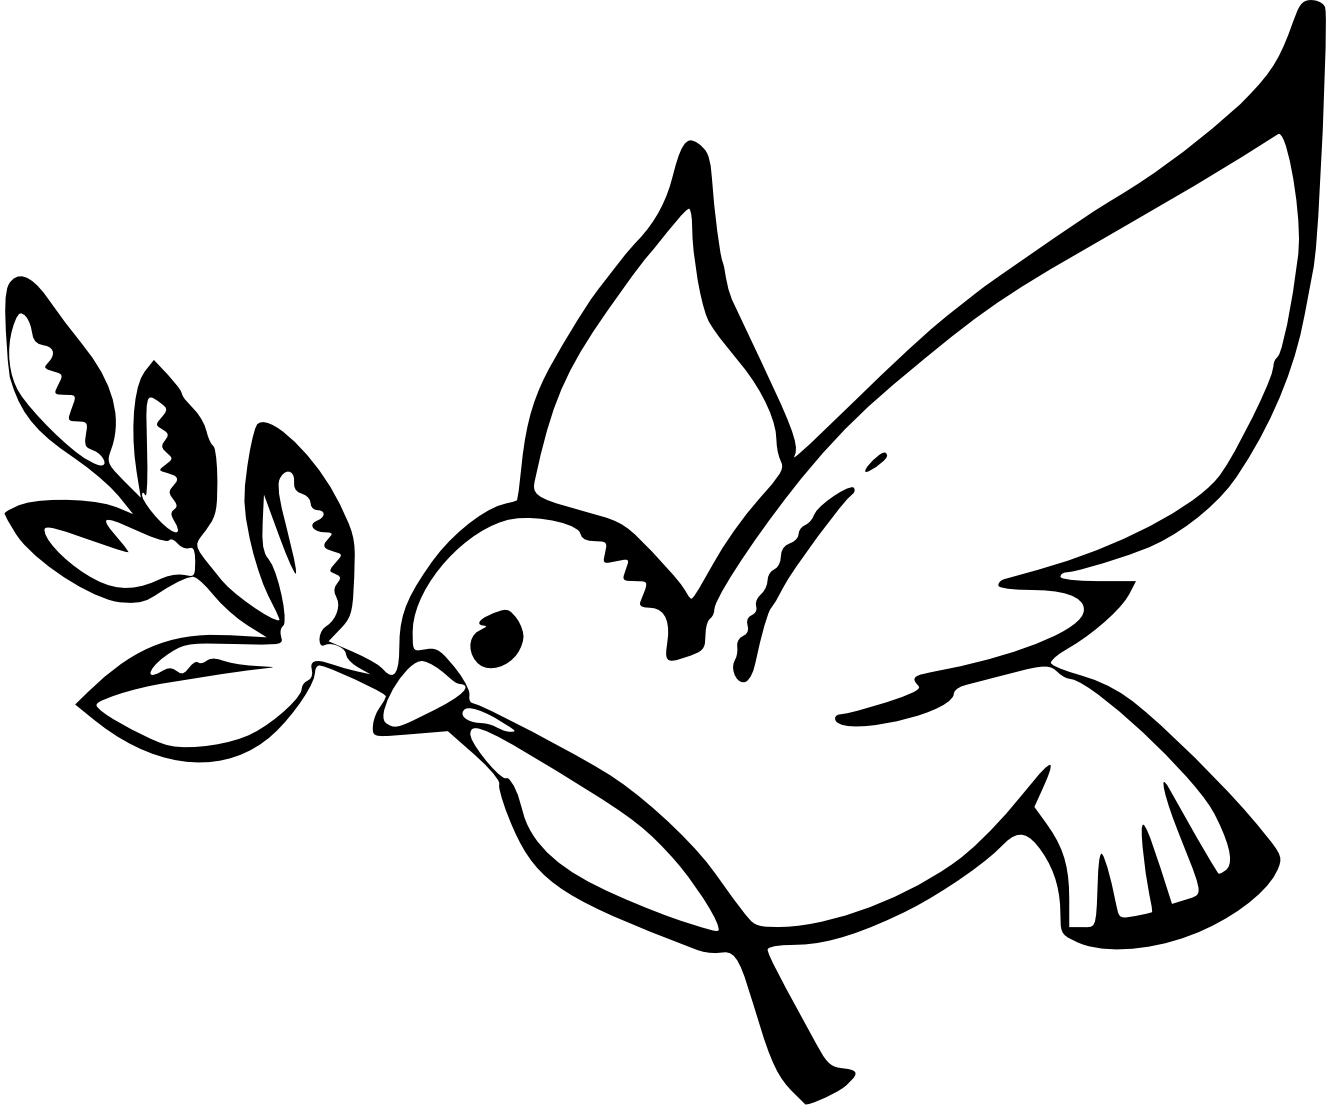 Pigeon clipart bible. Free printable peace sign